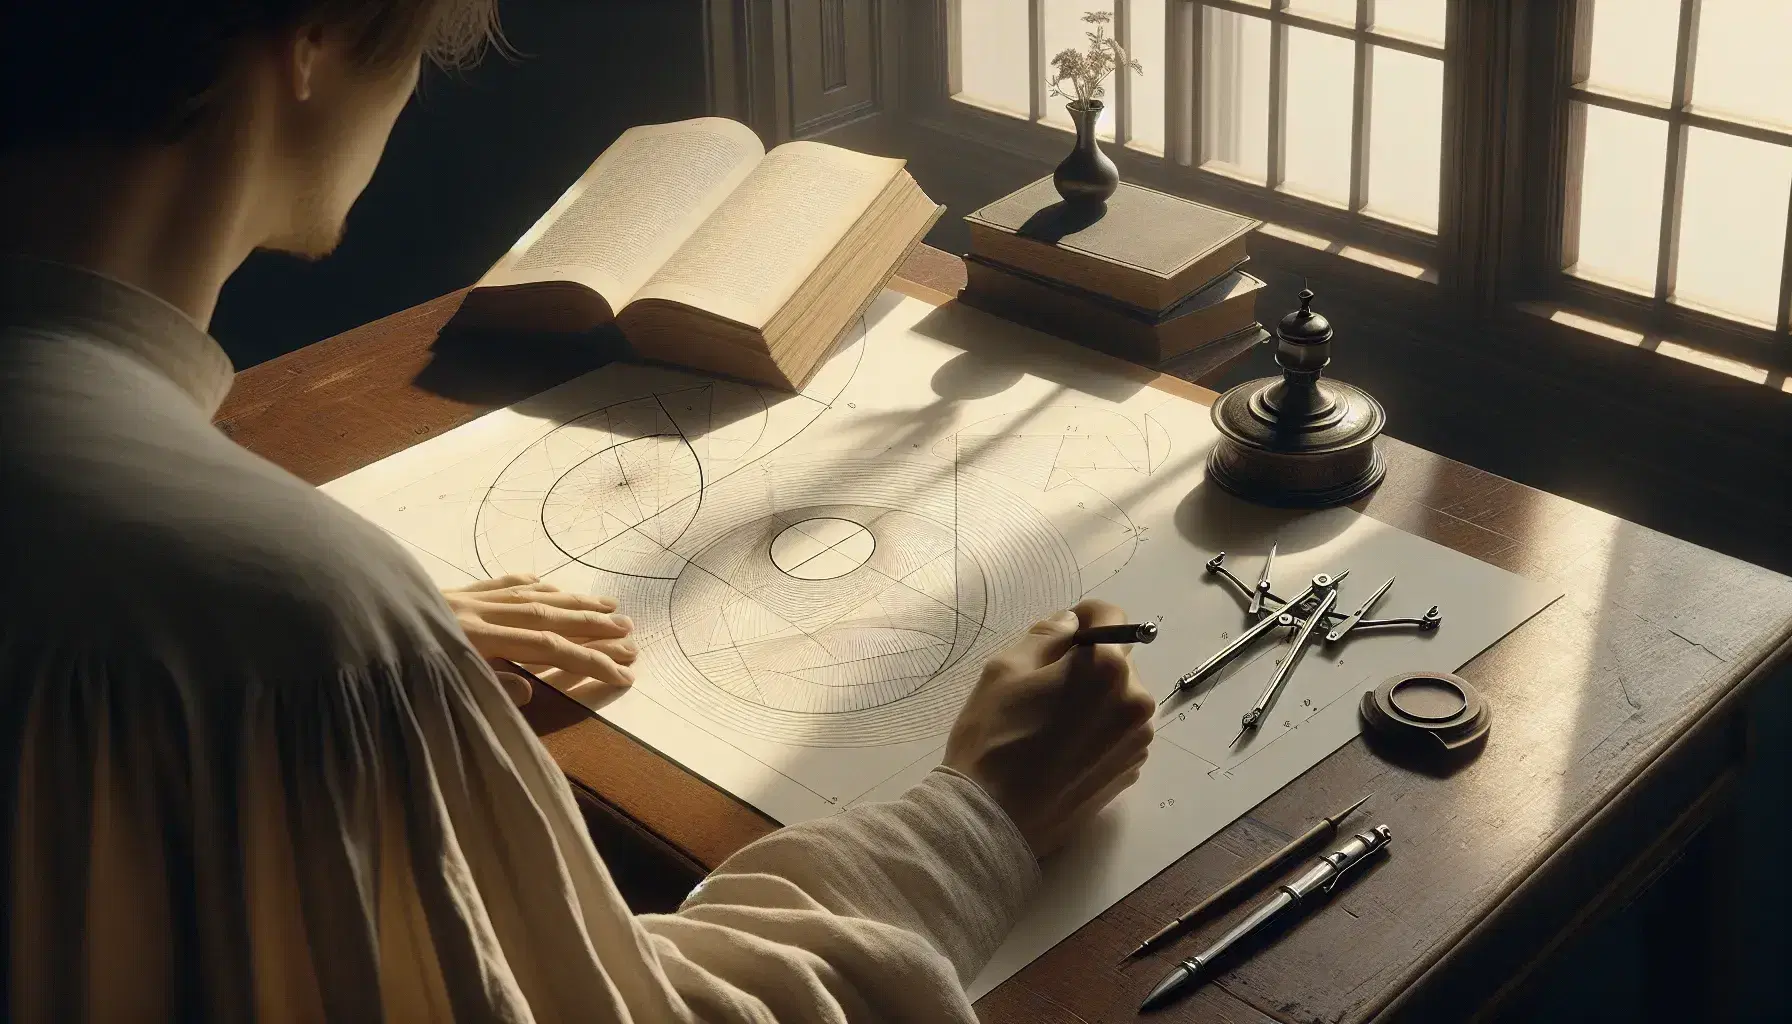 Person studying geometry with compasses, textbook, and inkwell on a wooden desk by a window, reflecting a focused academic setting.